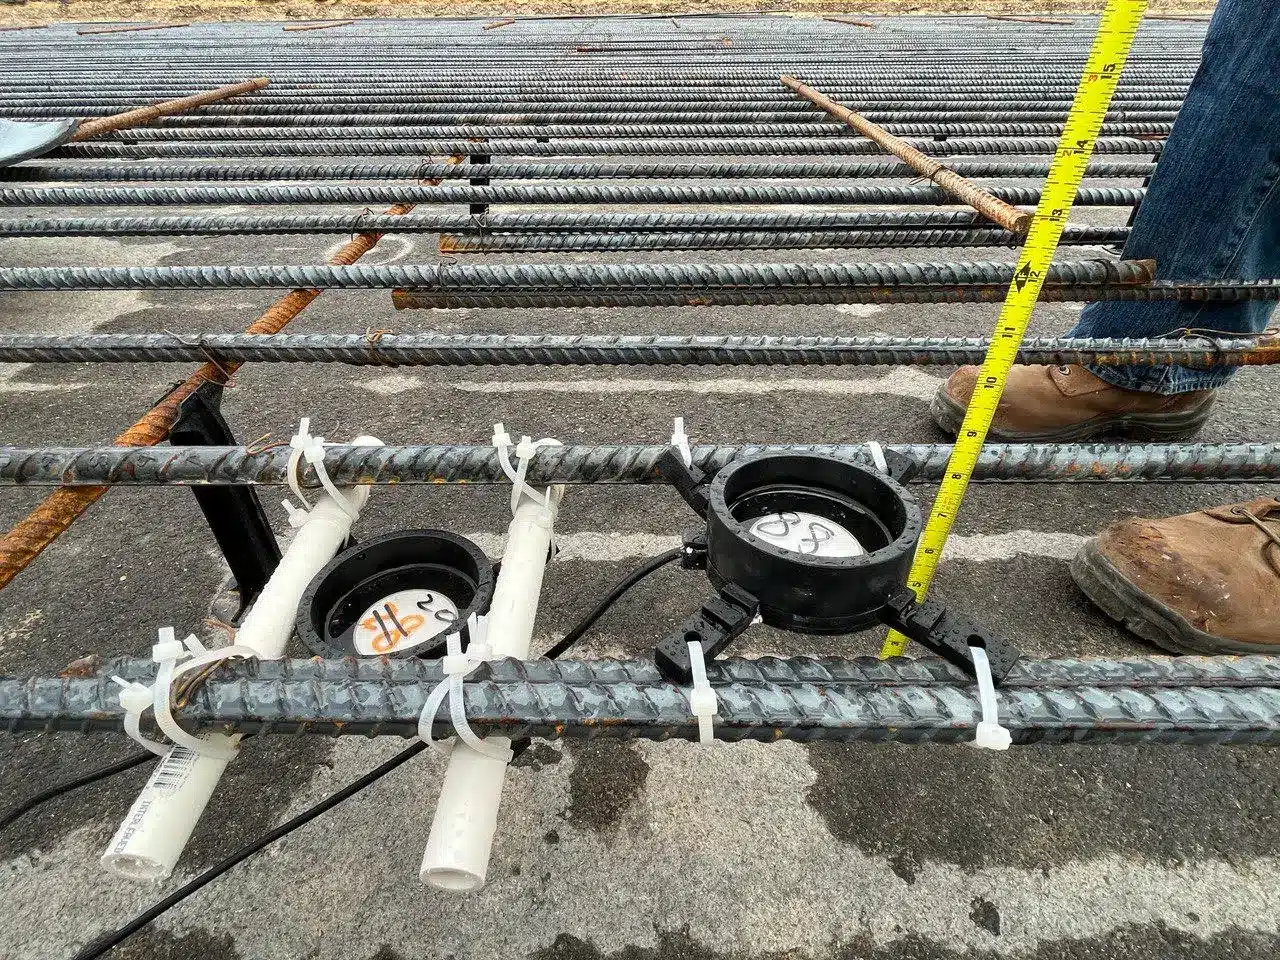 Sensors developed by Luna Lu and her team are installed into the formwork of Interstate 35 in Texas. Credit: Luna Lu